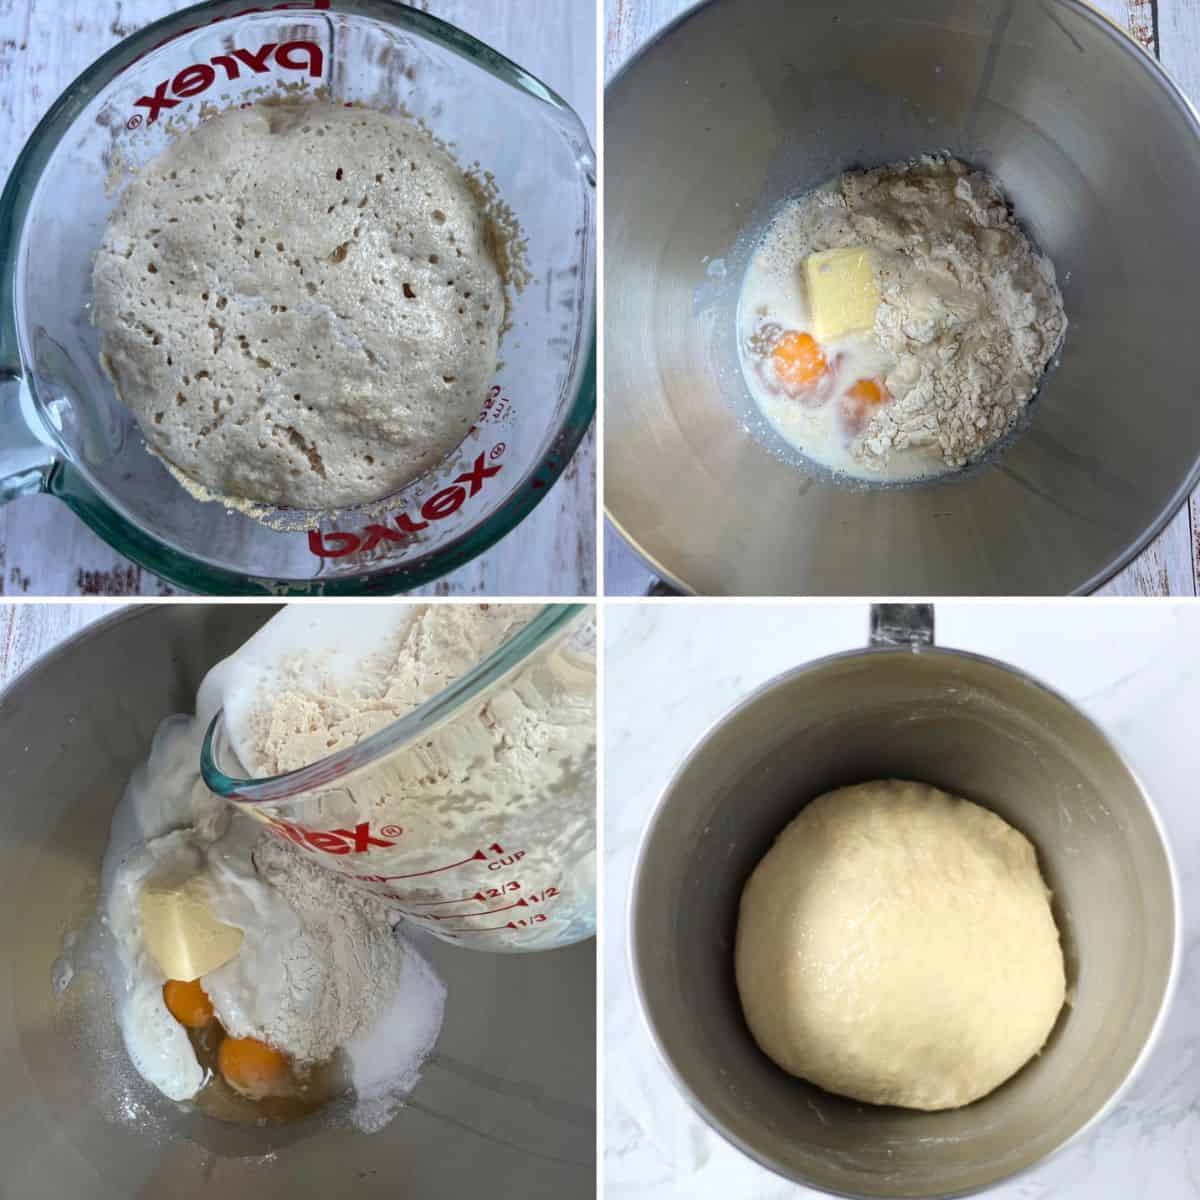 Step-by-step instructions on how to make ensaymada.